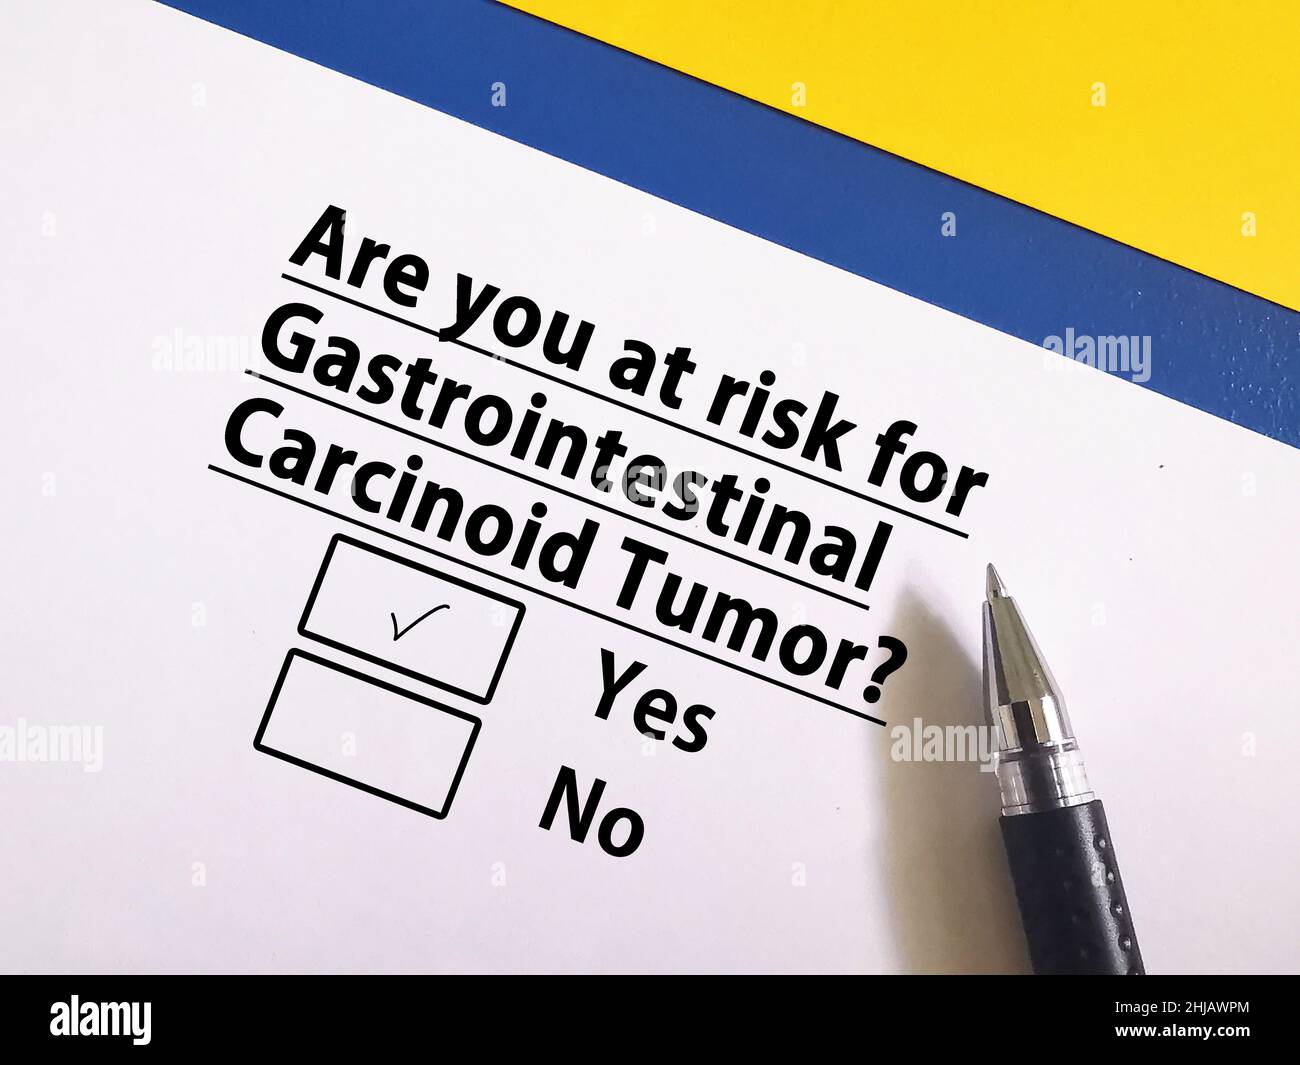 One person is answering question about cancer risk. He is at risk for gastrointestinal carcinoid tumour. Stock Photo